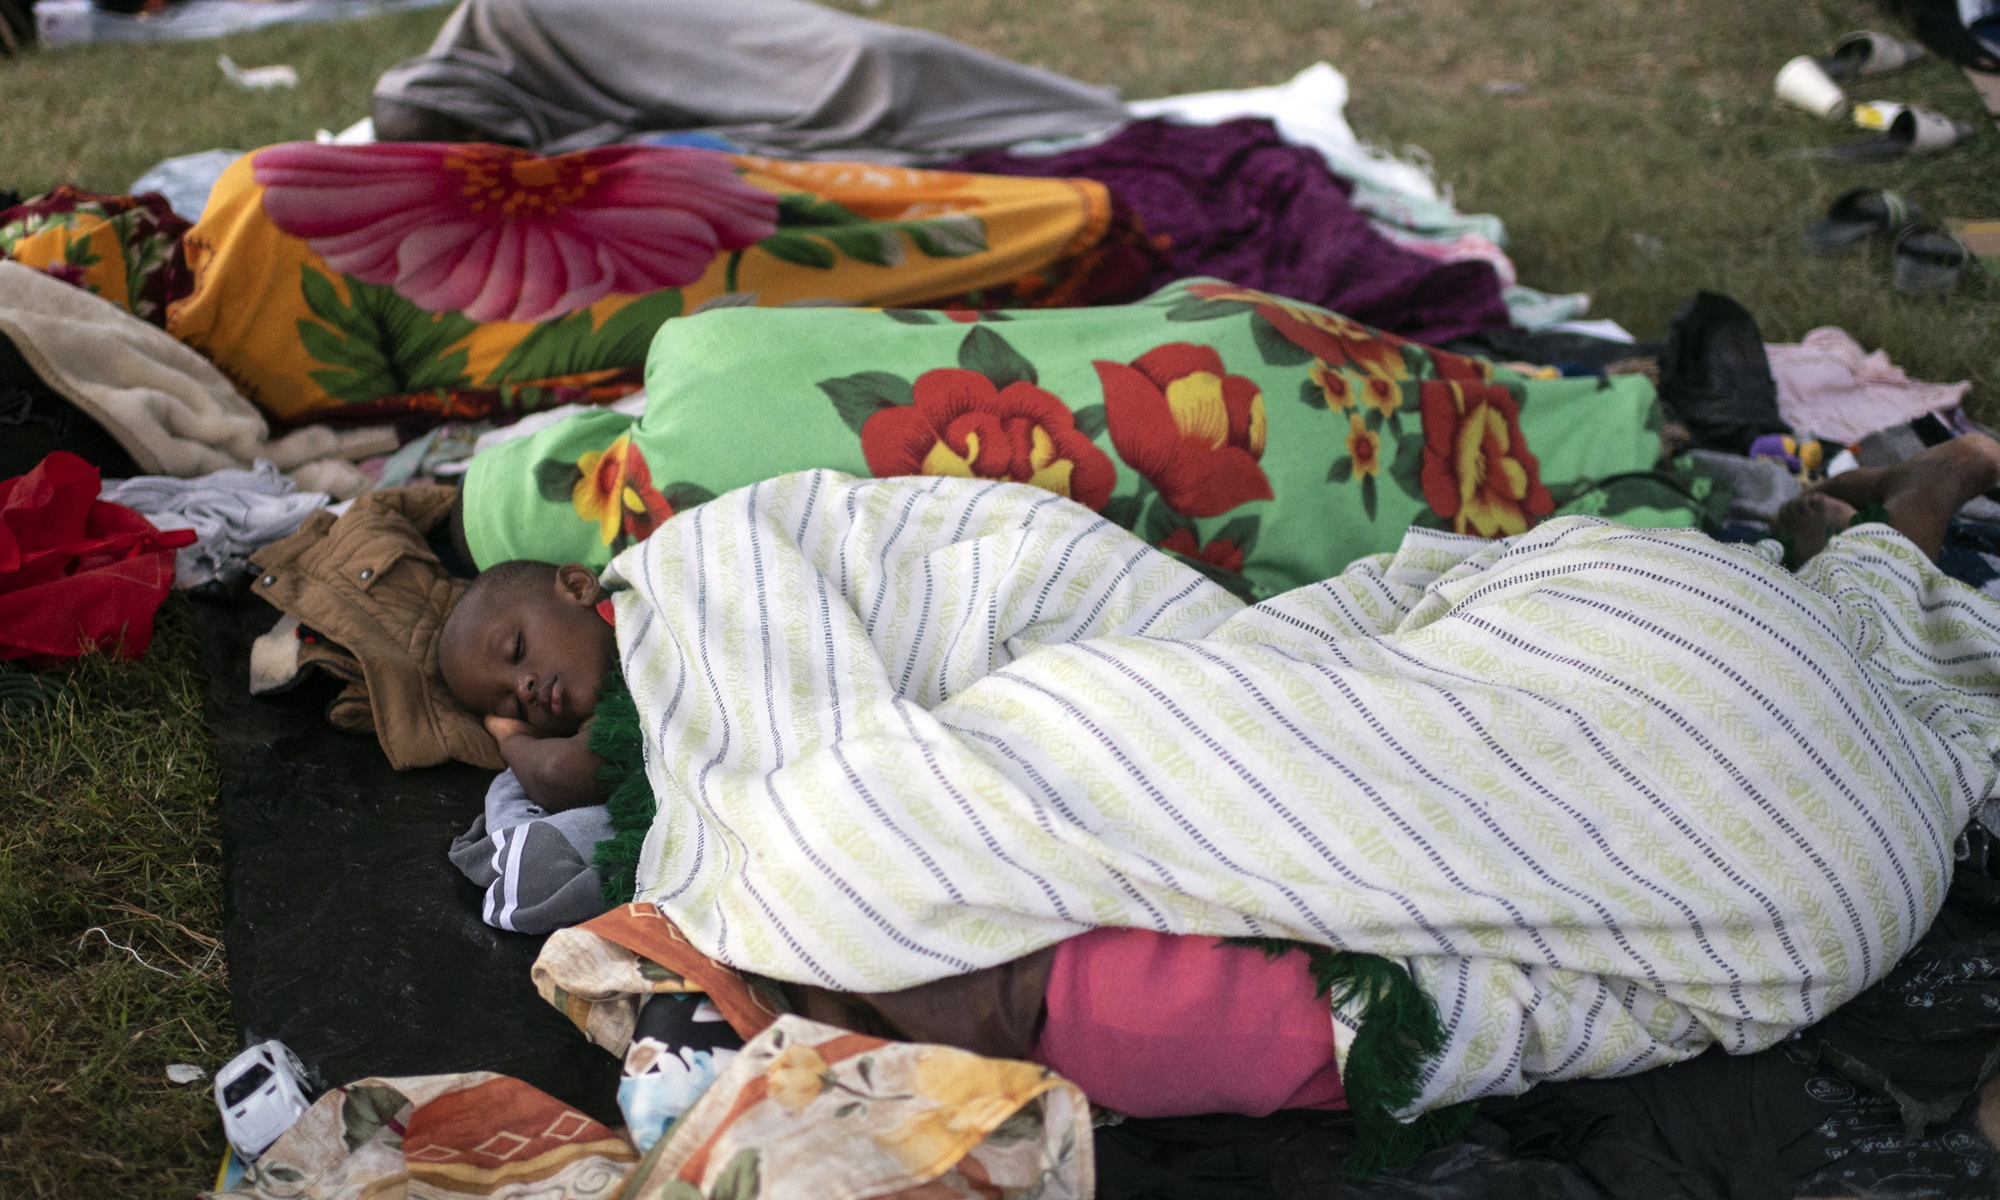 Haitian migrants rest at a shelter in Ciudad Acuna, Coahuila state, Mexico, on Wednesday. Clinging to ropes, some carrying children on their shoulders, Haitian migrants stranded at the US border cross the Rio Grande back into Mexico in search of food, water or medical treatment. Photo: AFP